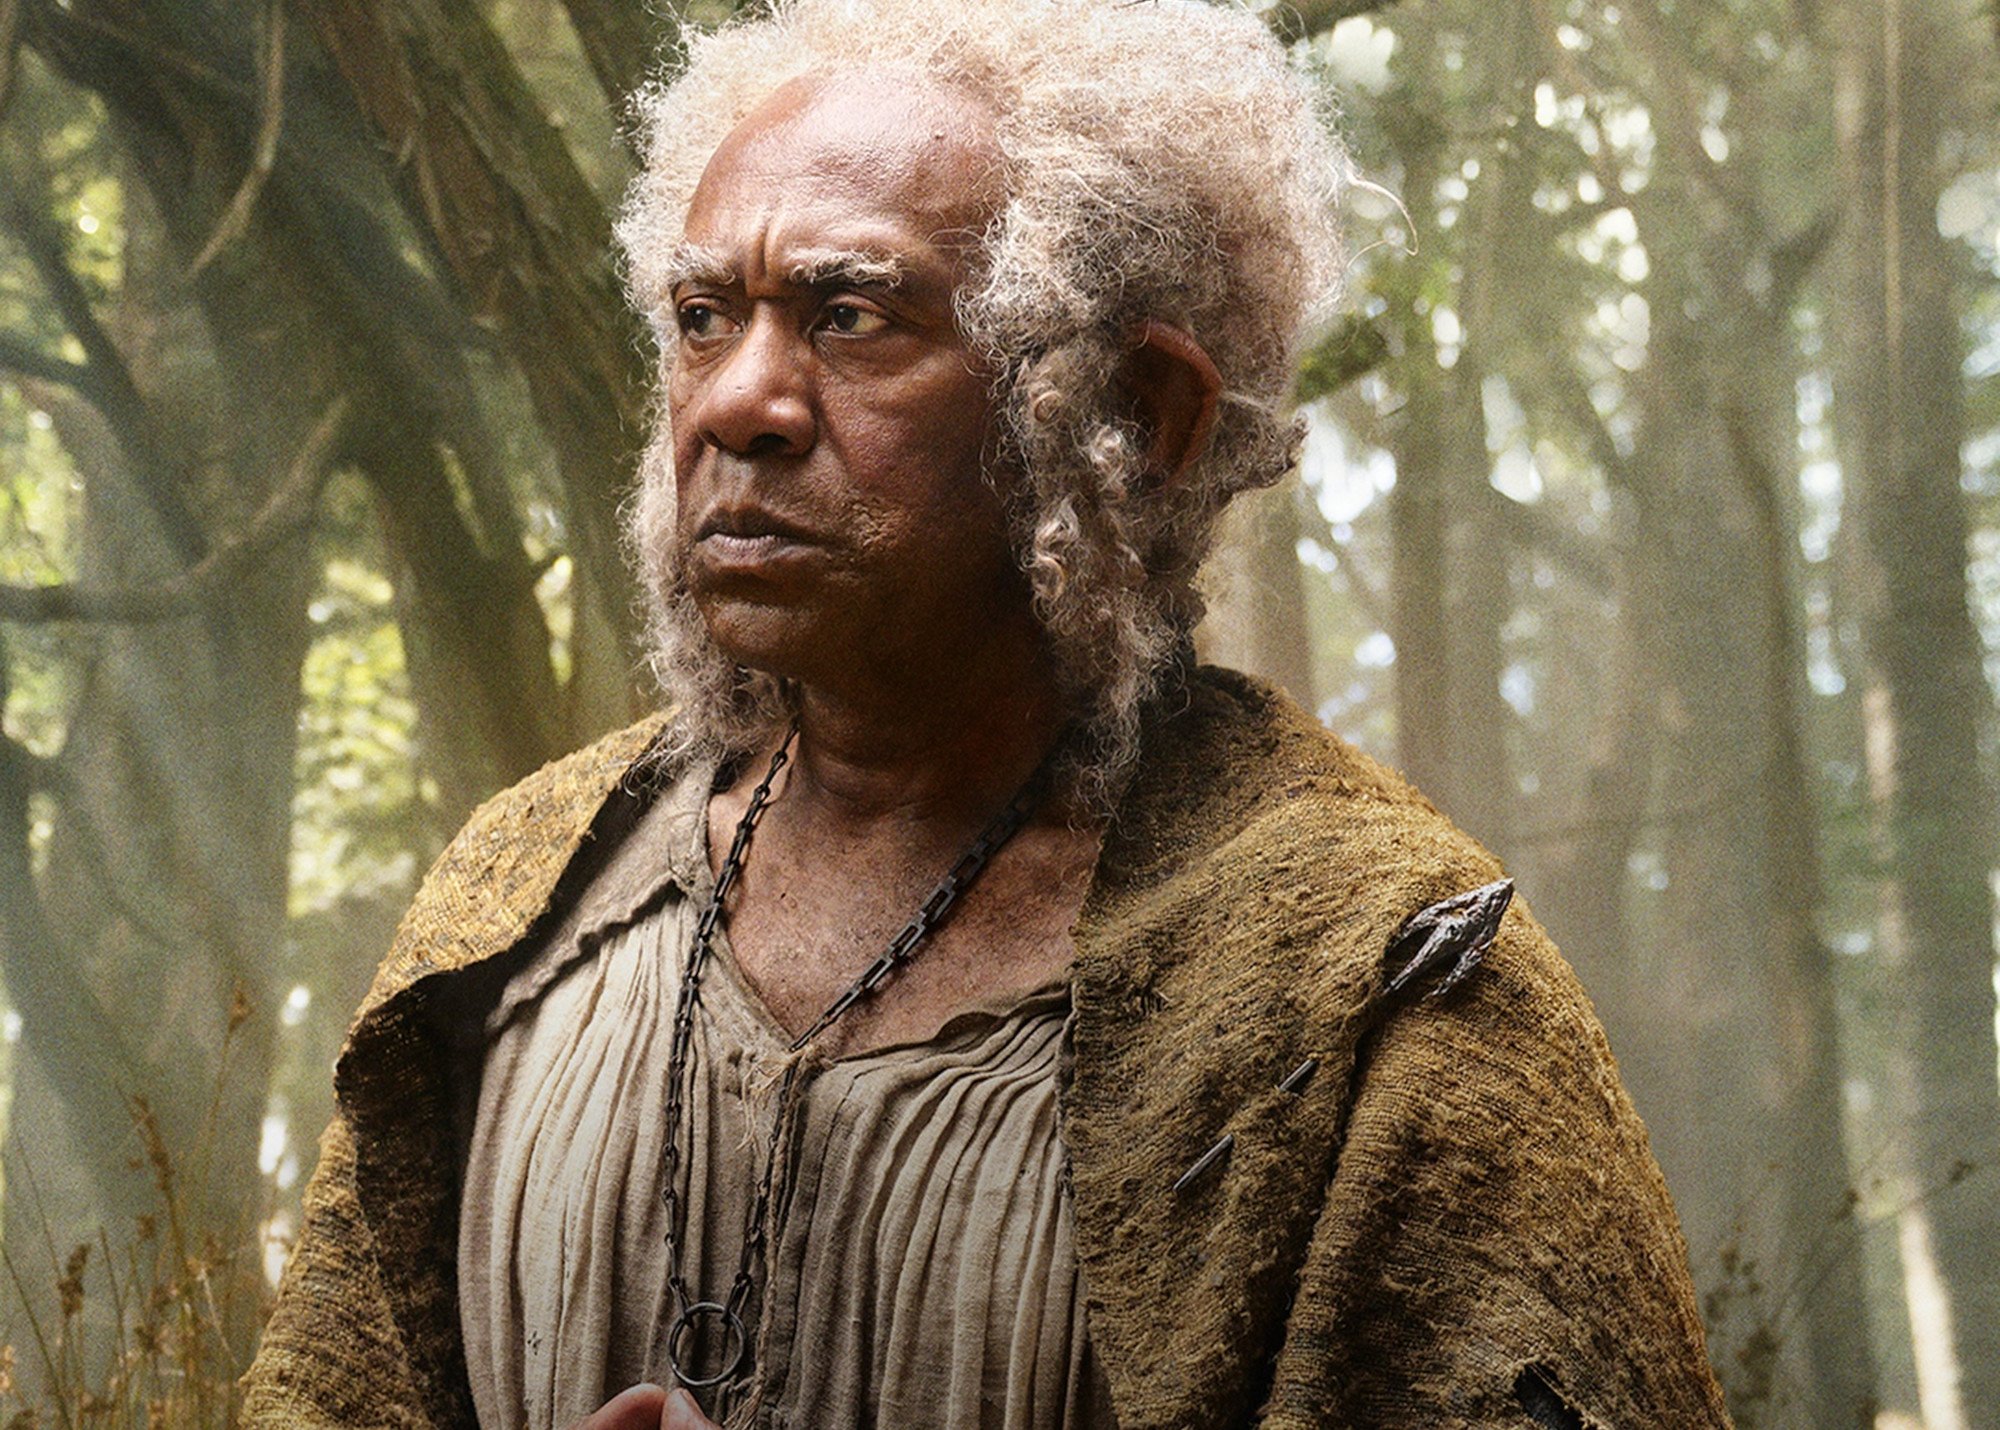 Sir Lenny Henry as Sadoc Burrows, one of the Harfoots in 'The Lord of the Rings: The Rings of Power.' He's wearing a brown cloak and surrounded by trees.